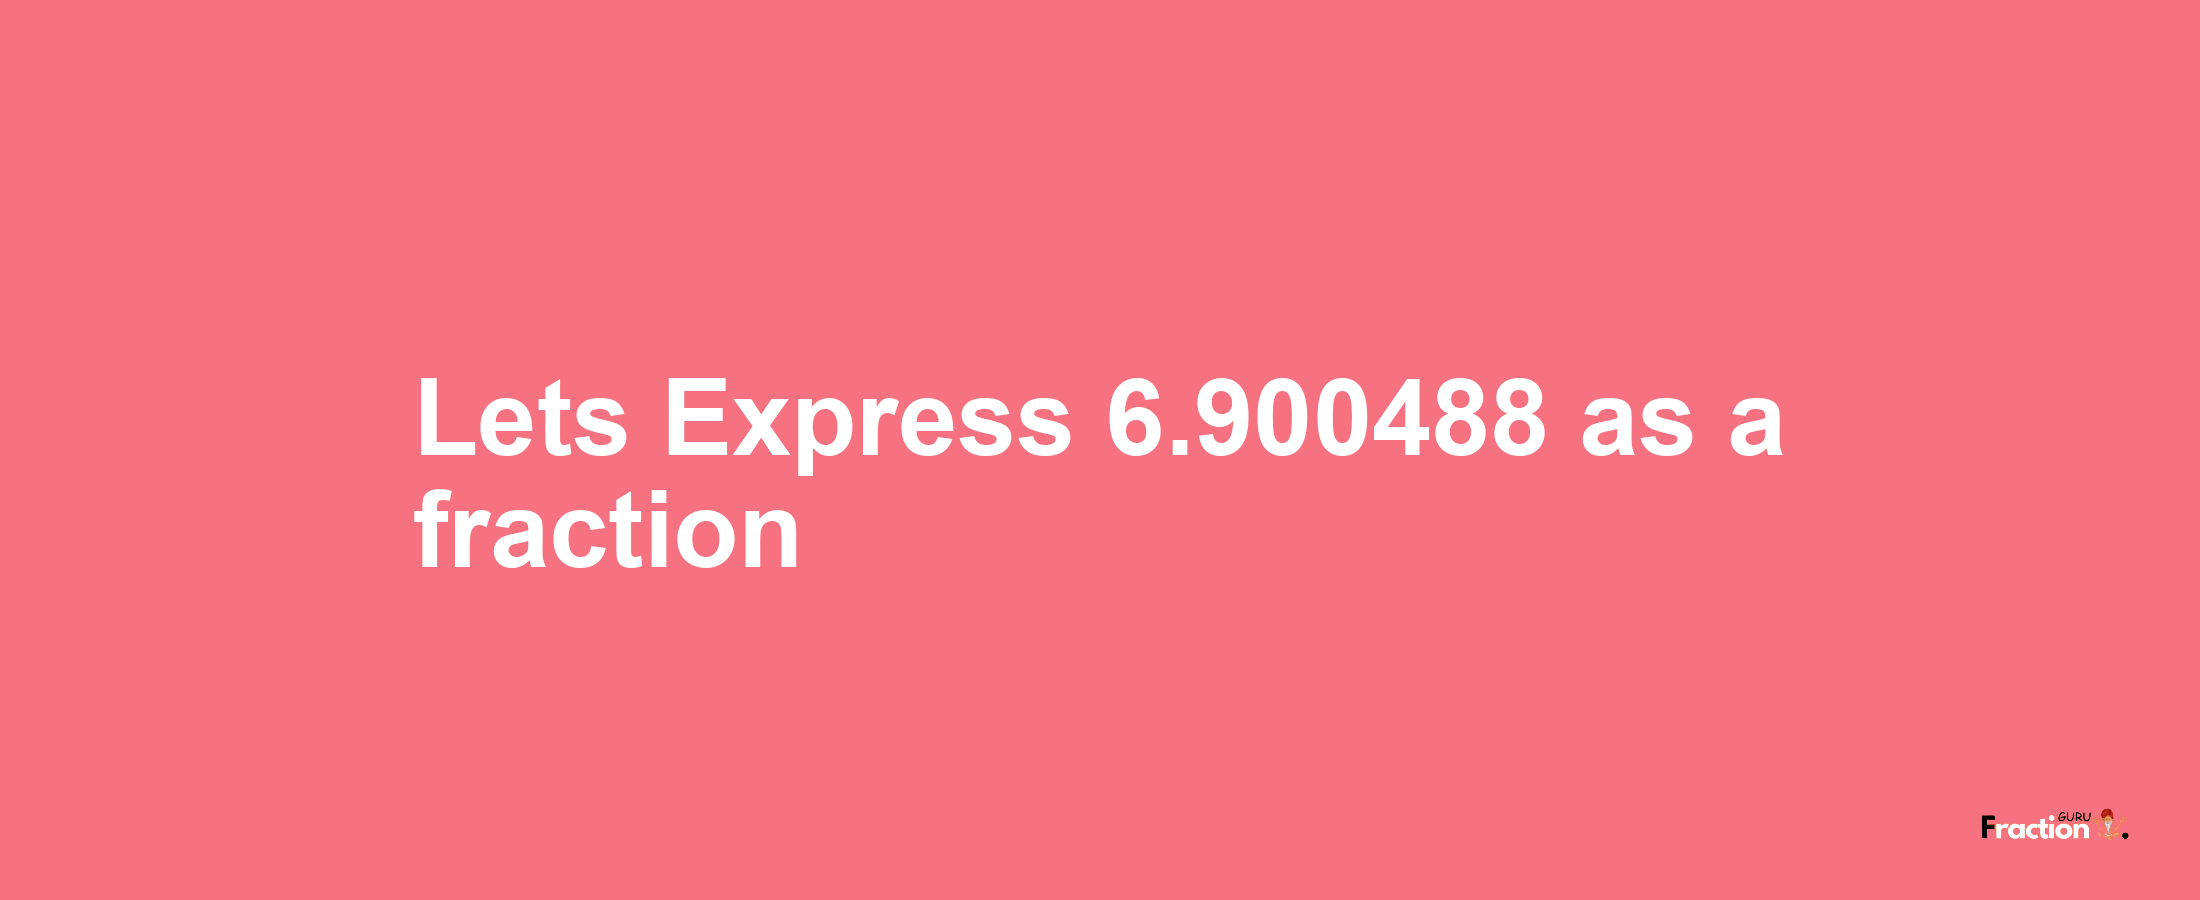 Lets Express 6.900488 as afraction